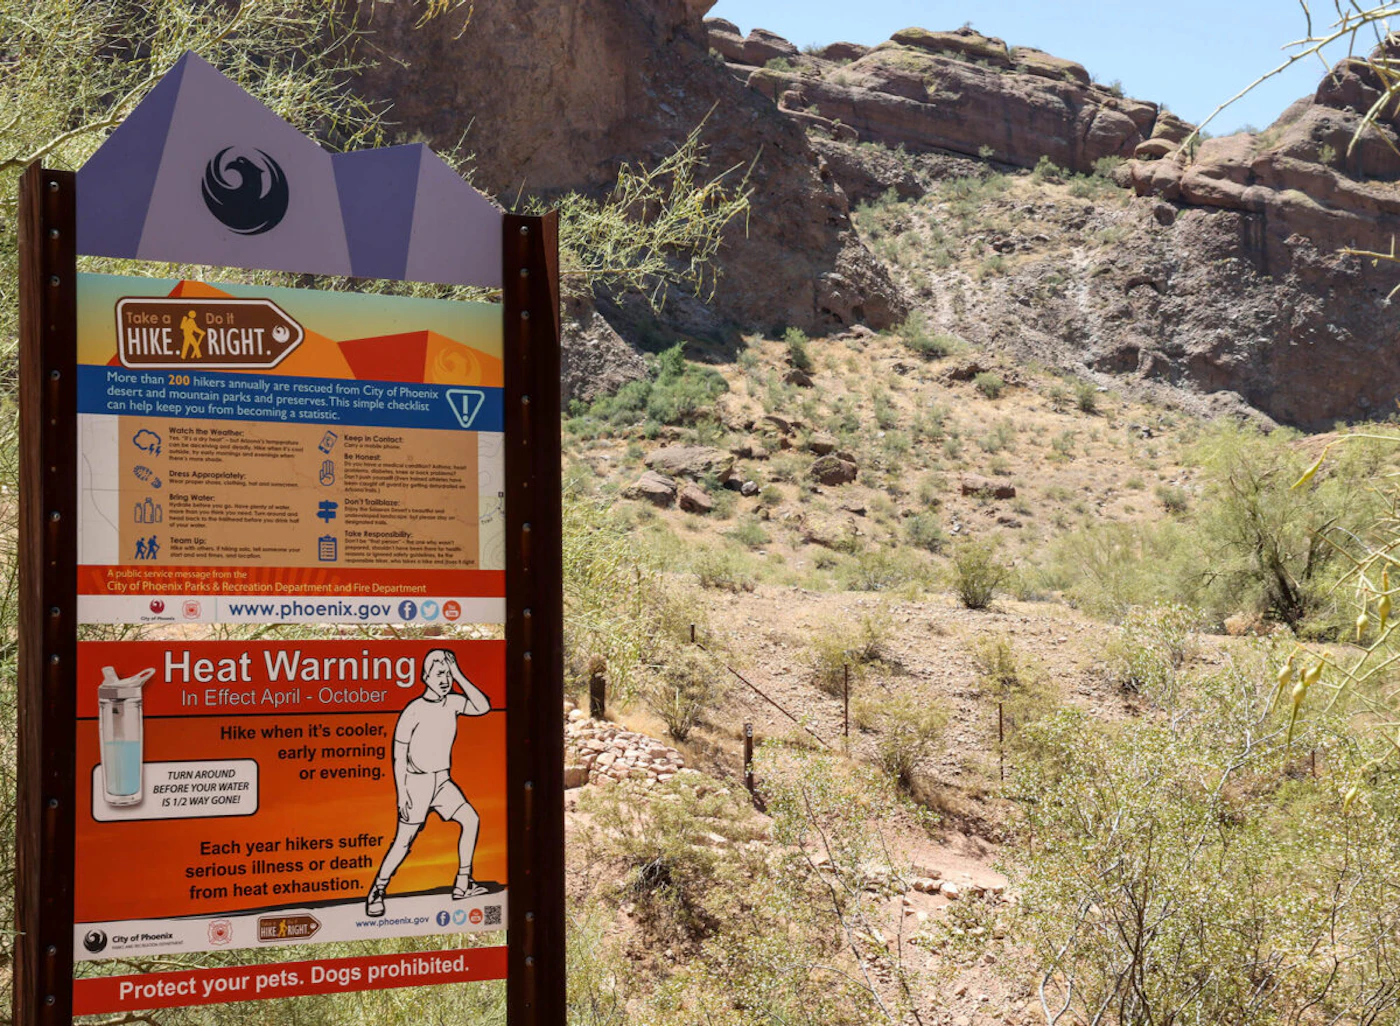 “Take a Hike, Do it Right” signs warn visitors of the dangers while hiking in hot conditions. The city limits hiking on some popular trails from 11 a.m. to 5 p.m. on days the National Weather Service issues an excessive heat warning. (Photo by Evelin Ruelas/Cronkite News)